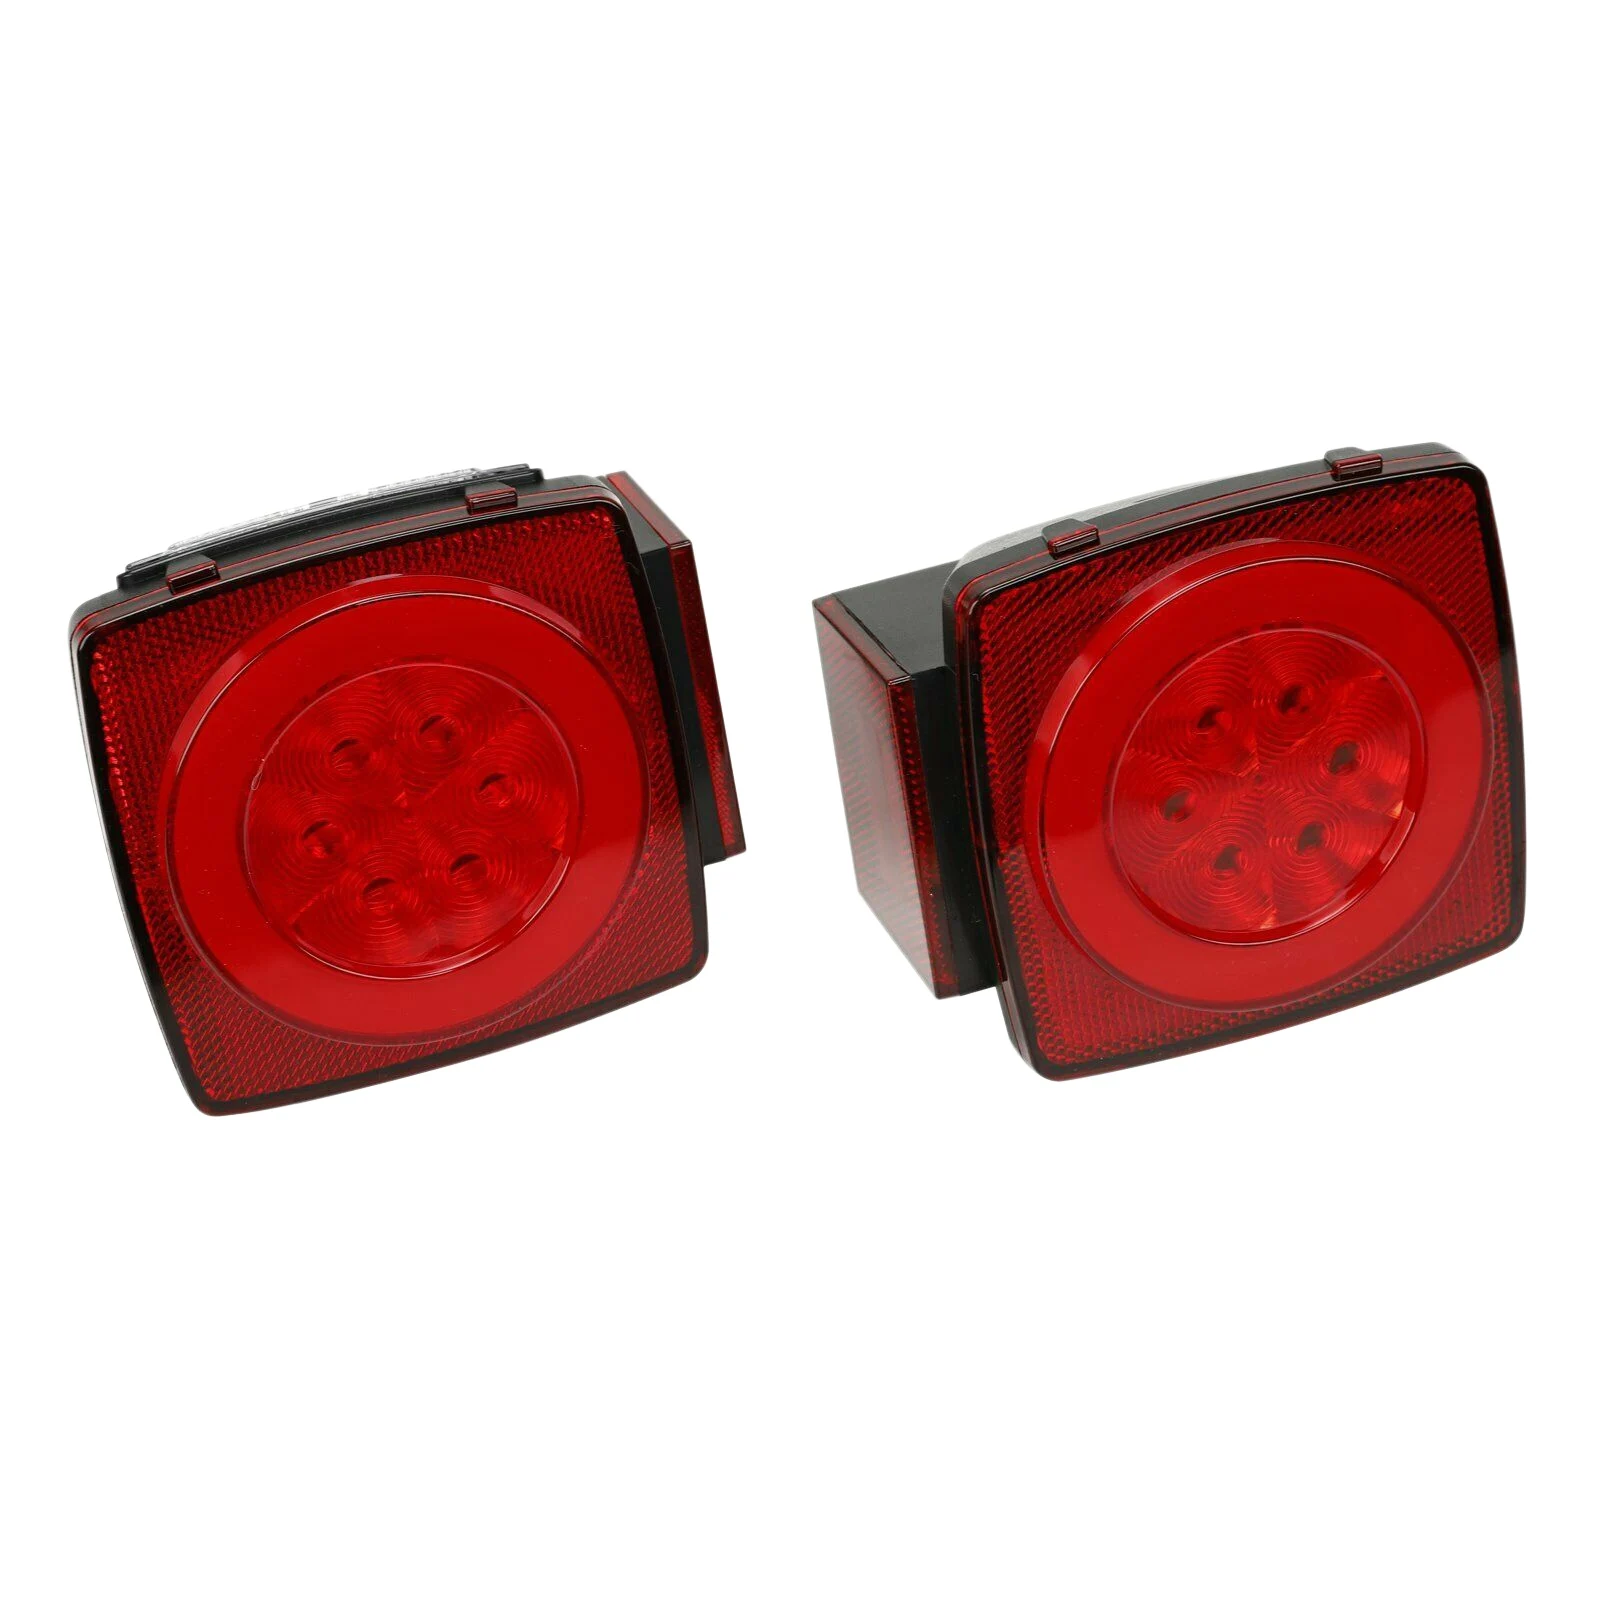 

1 Pair Red LED Submersible Stop Brake Trailer Tail License Lights for Camper Truck RV Boat Snowmobile Under 80 Inch